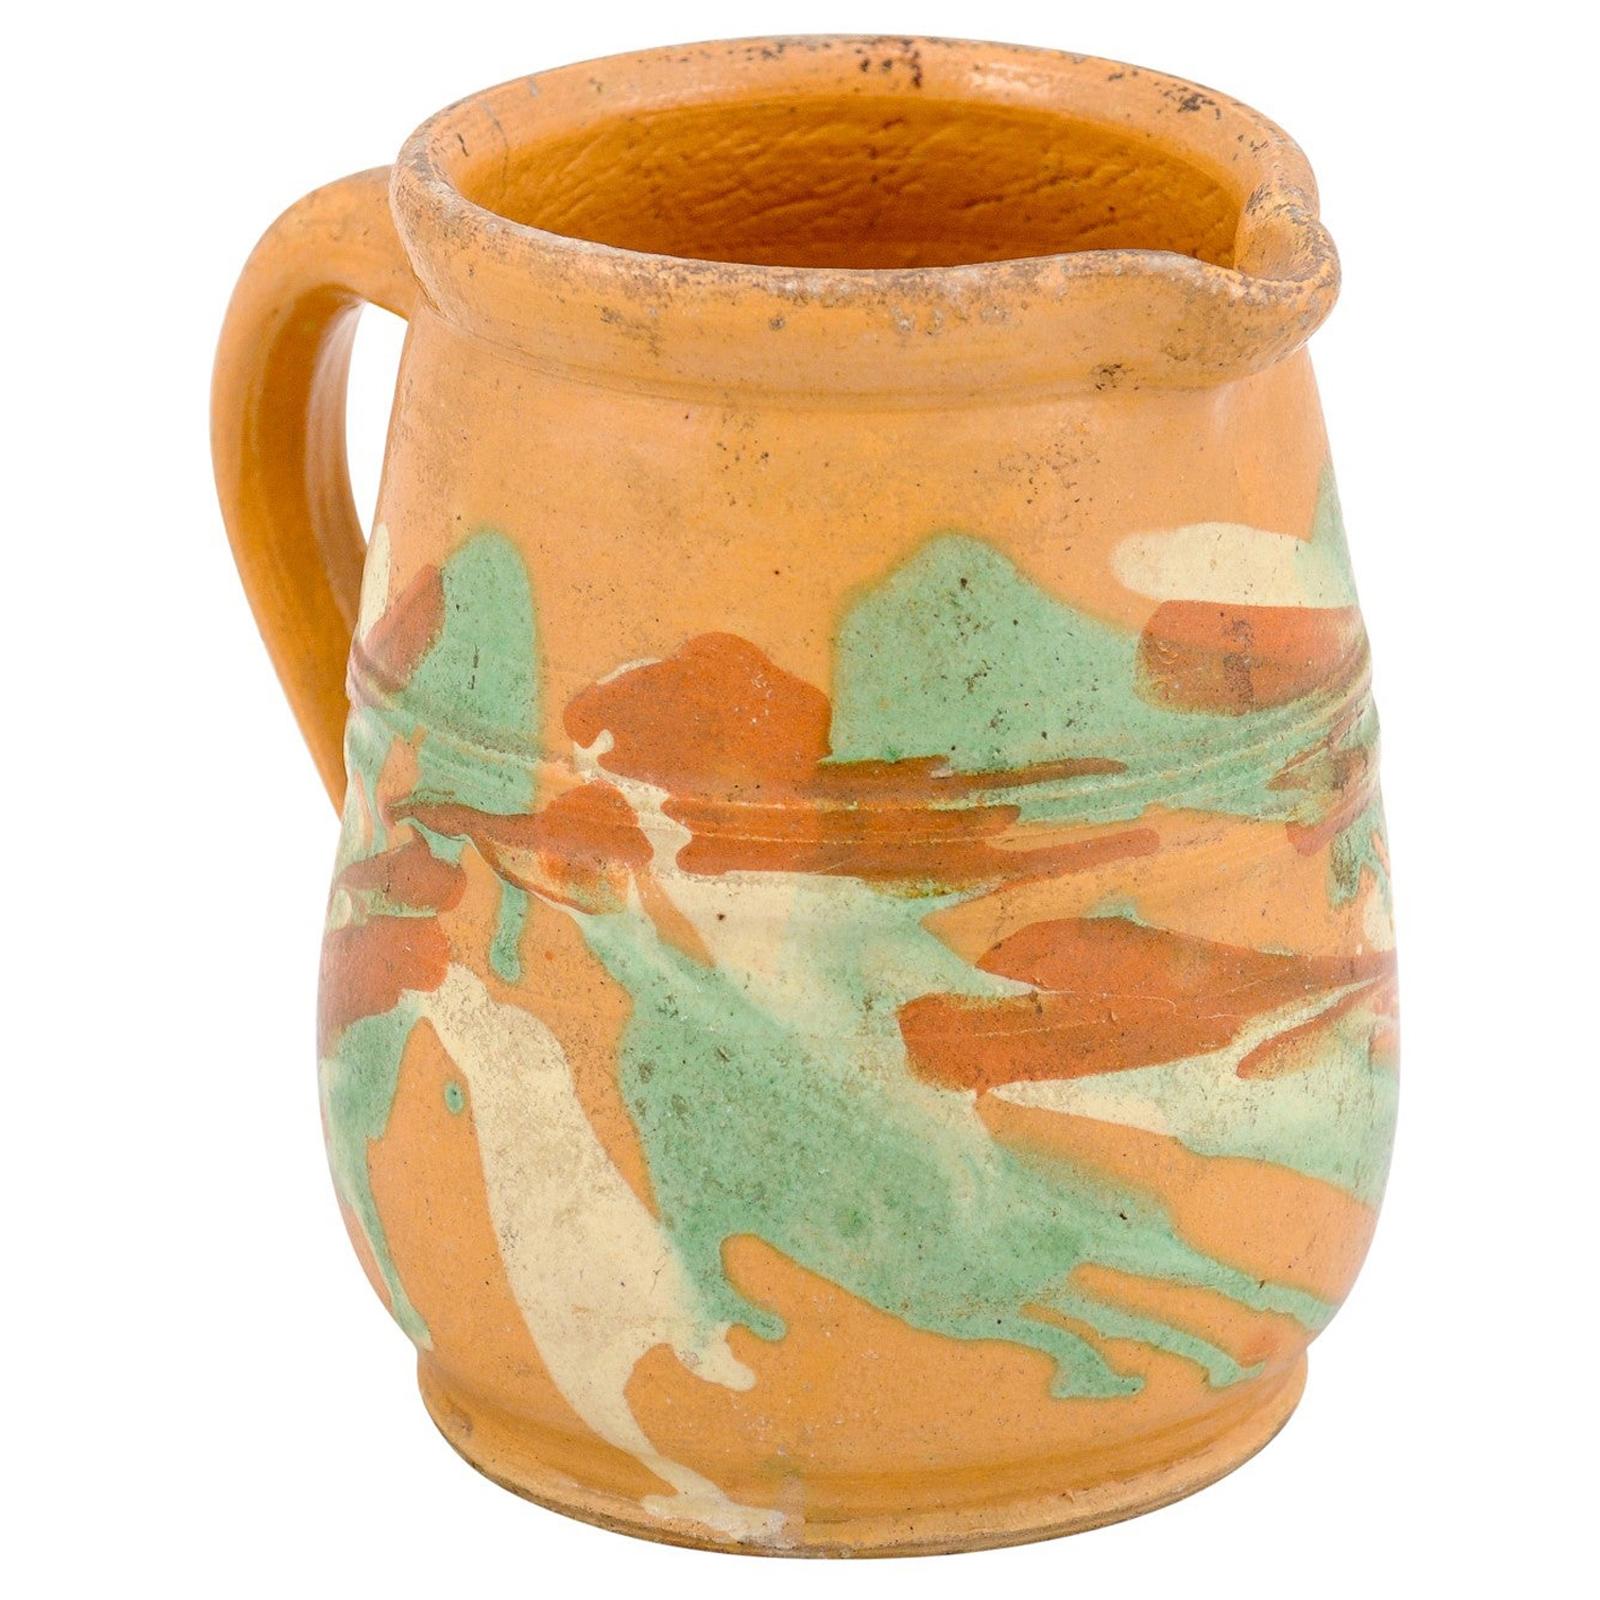 19th Century French Jaspe Pottery Pitcher with Yellow Glaze and Green Accents